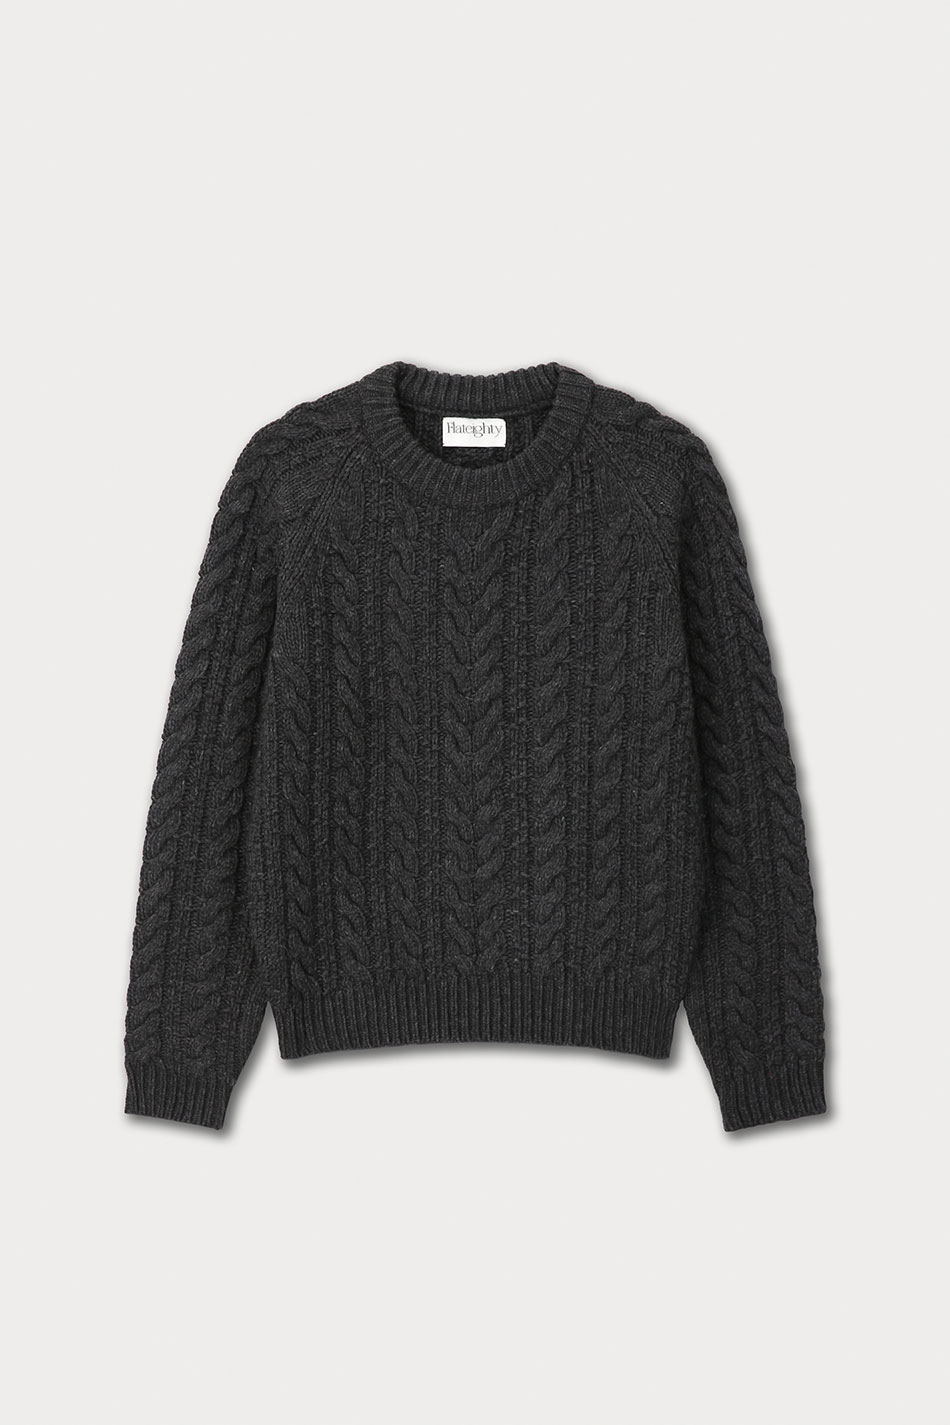 3rd / Cable Sweater (Charcoal)